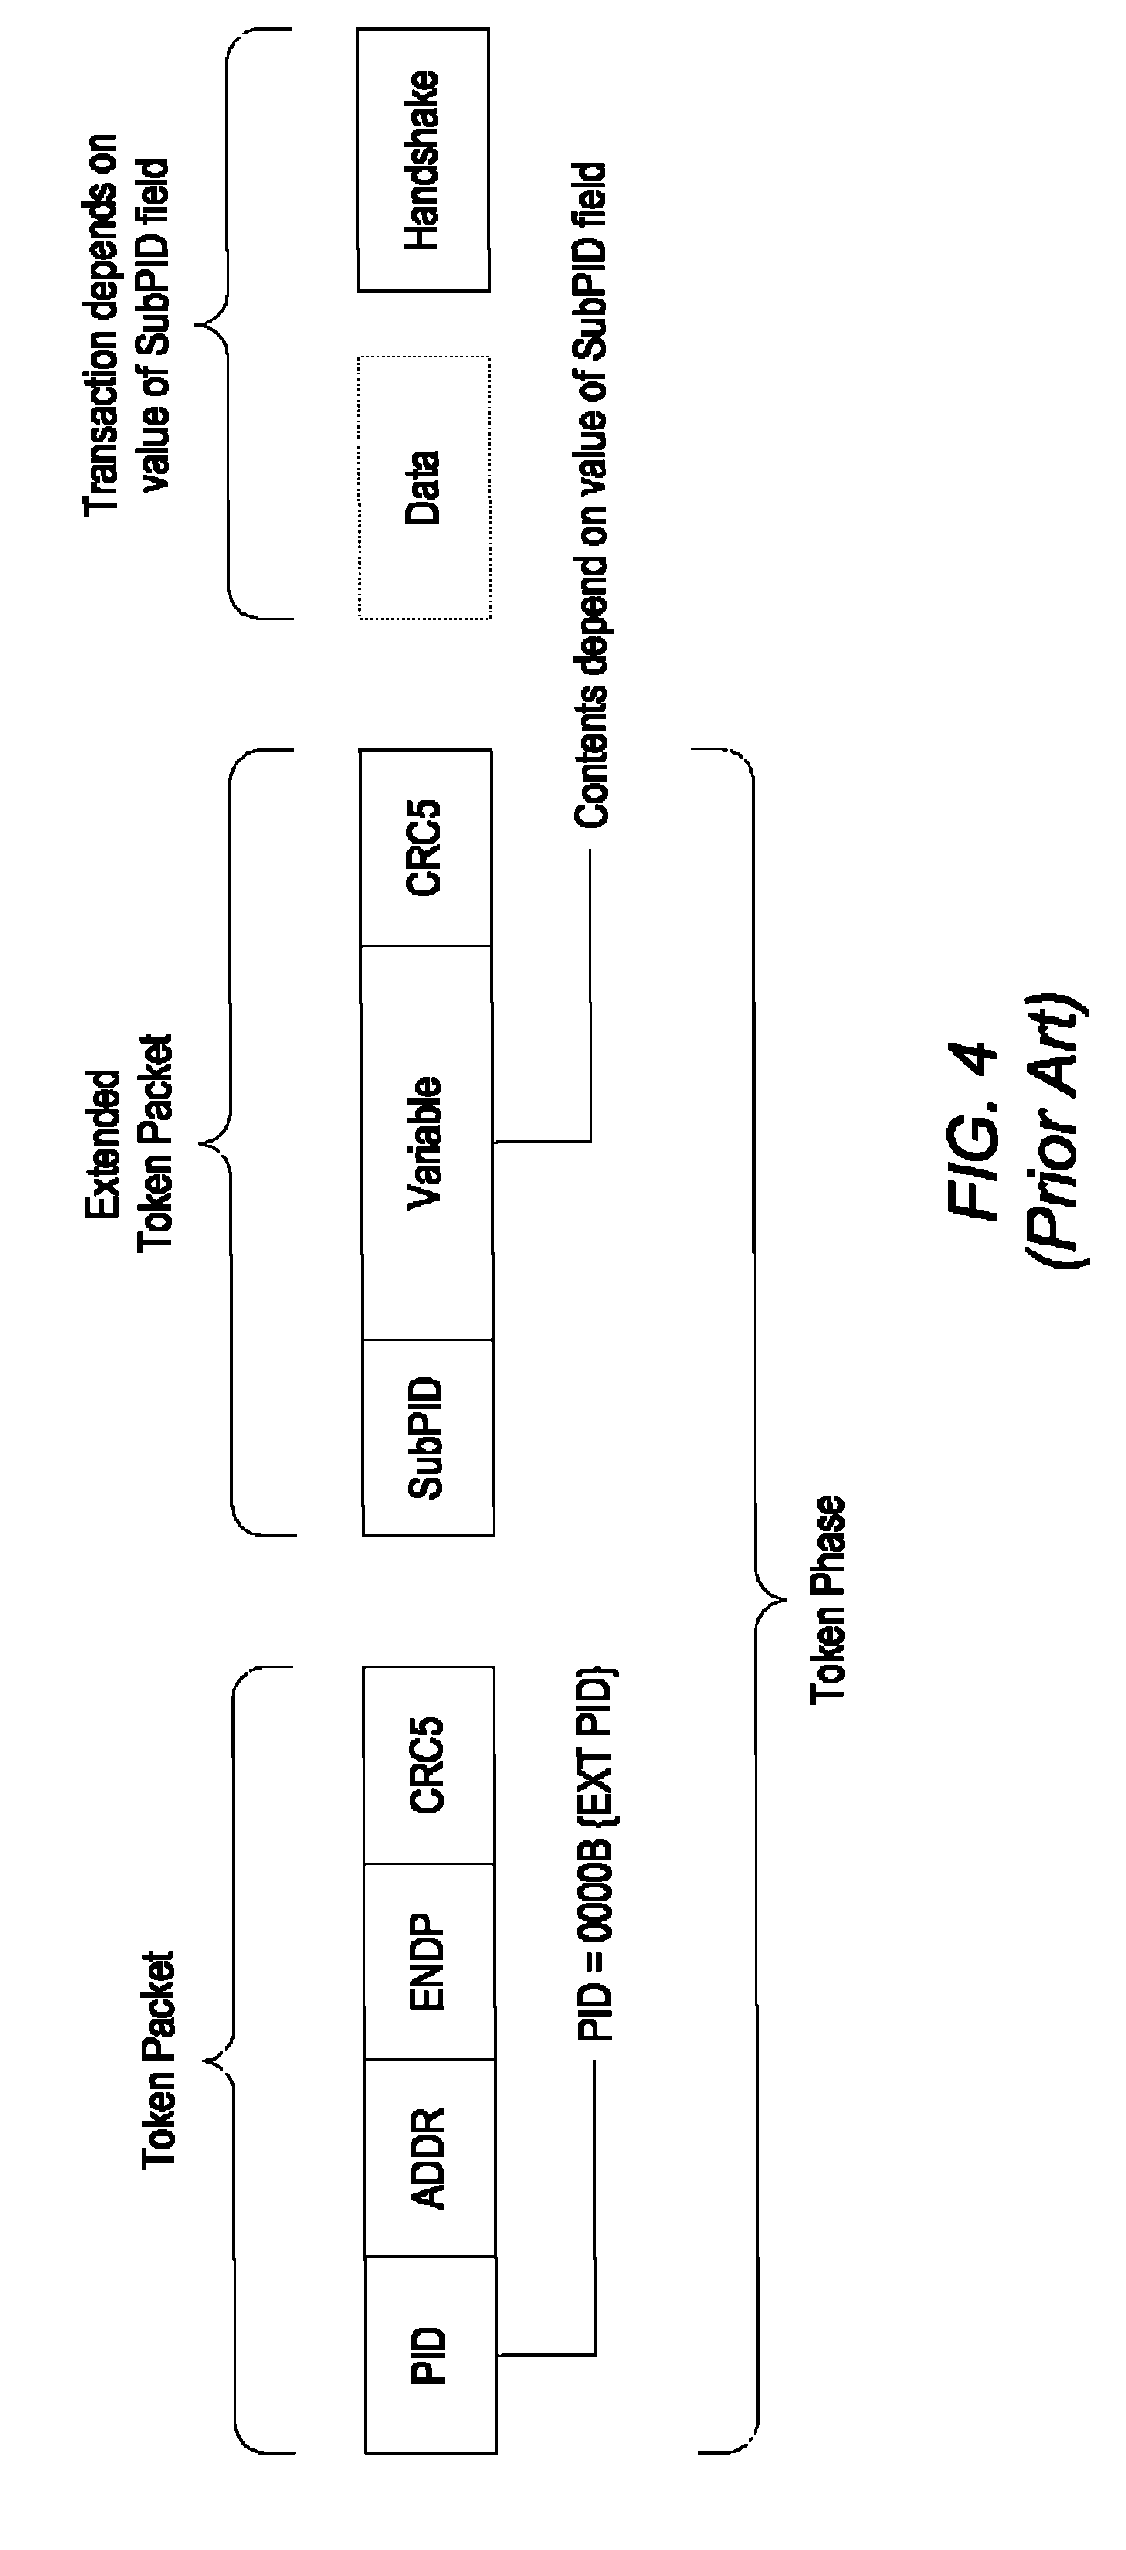 Physical device (PHY) support of the USB2.0 link power management addendum using a ULPI PHY interface standard